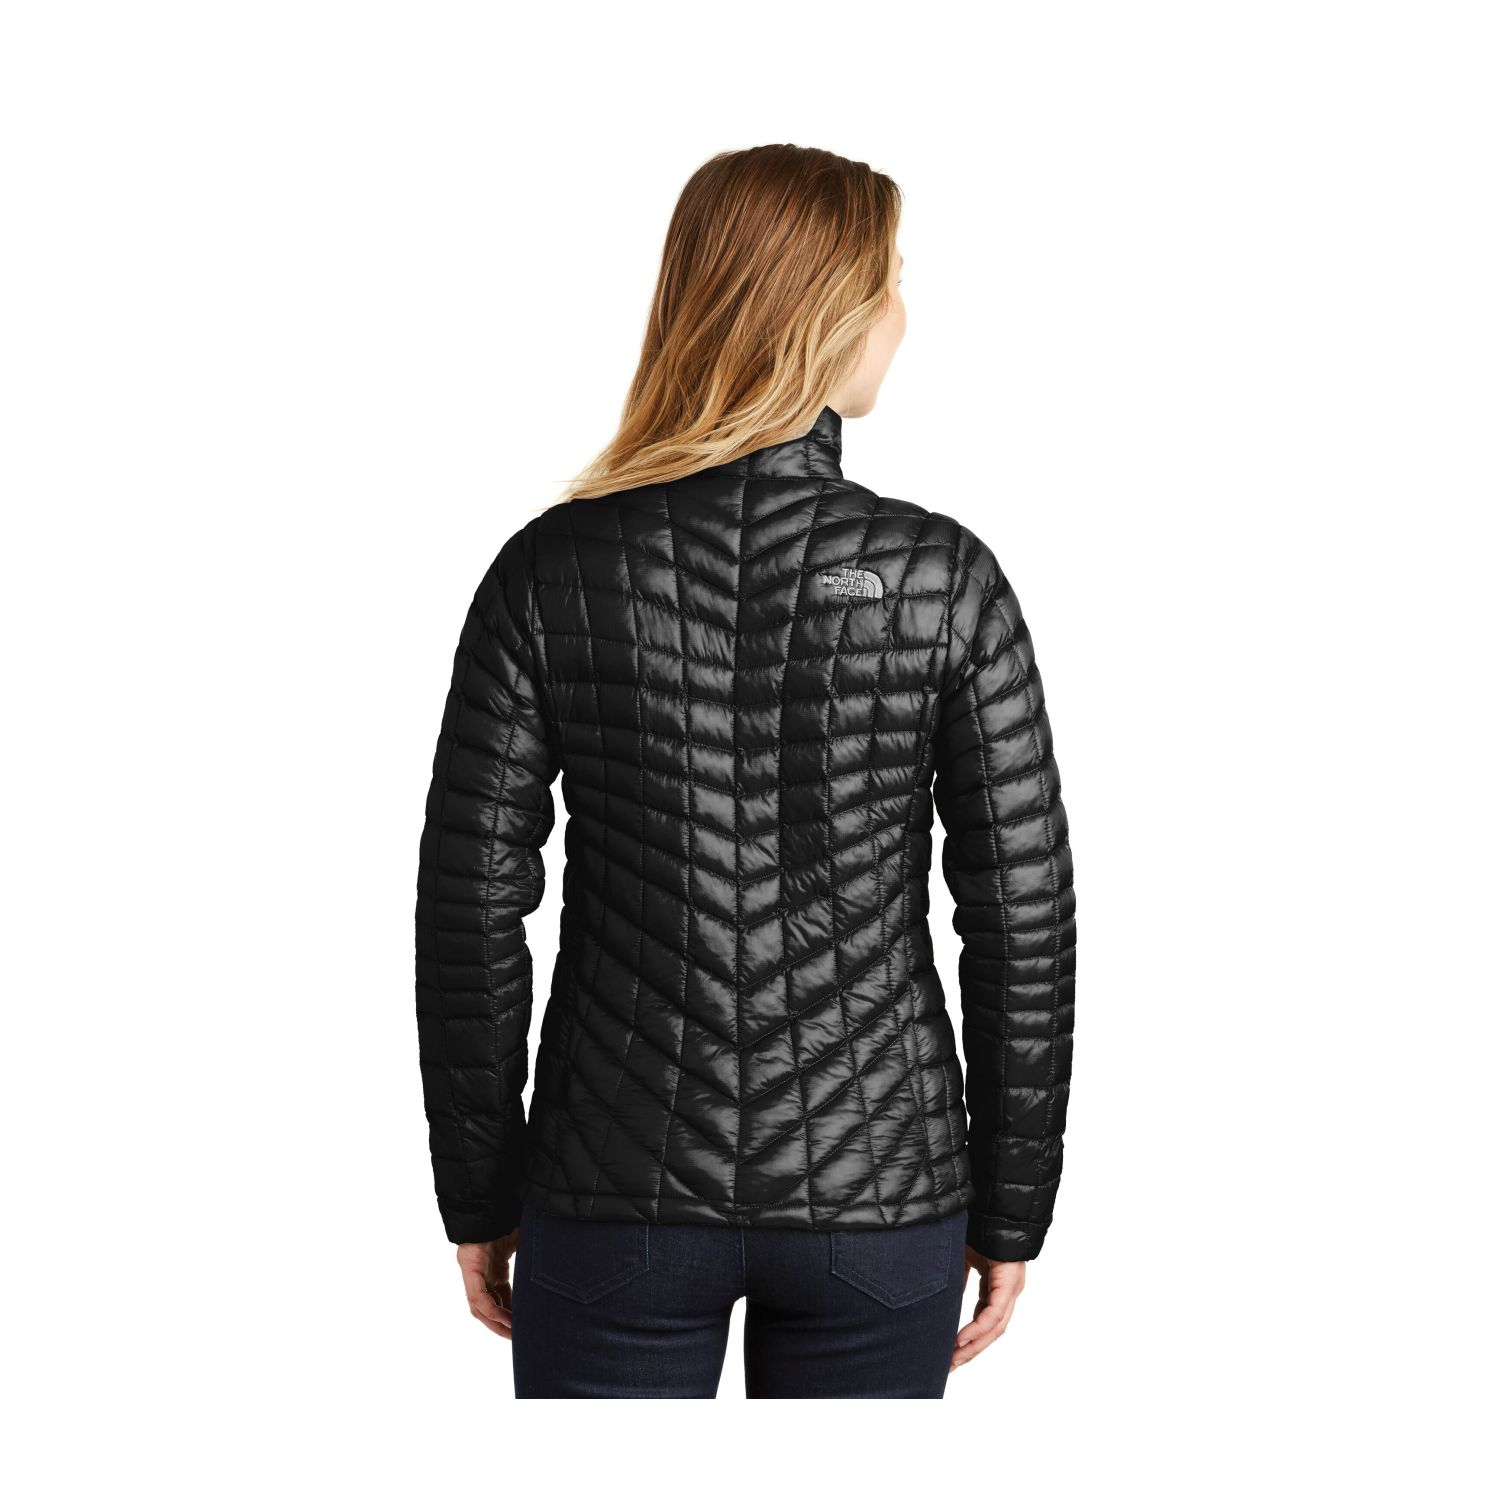 THE NORTH FACE THERMOBALL TREKKER LADIES' JACKET #NF0A3LHK Black Back